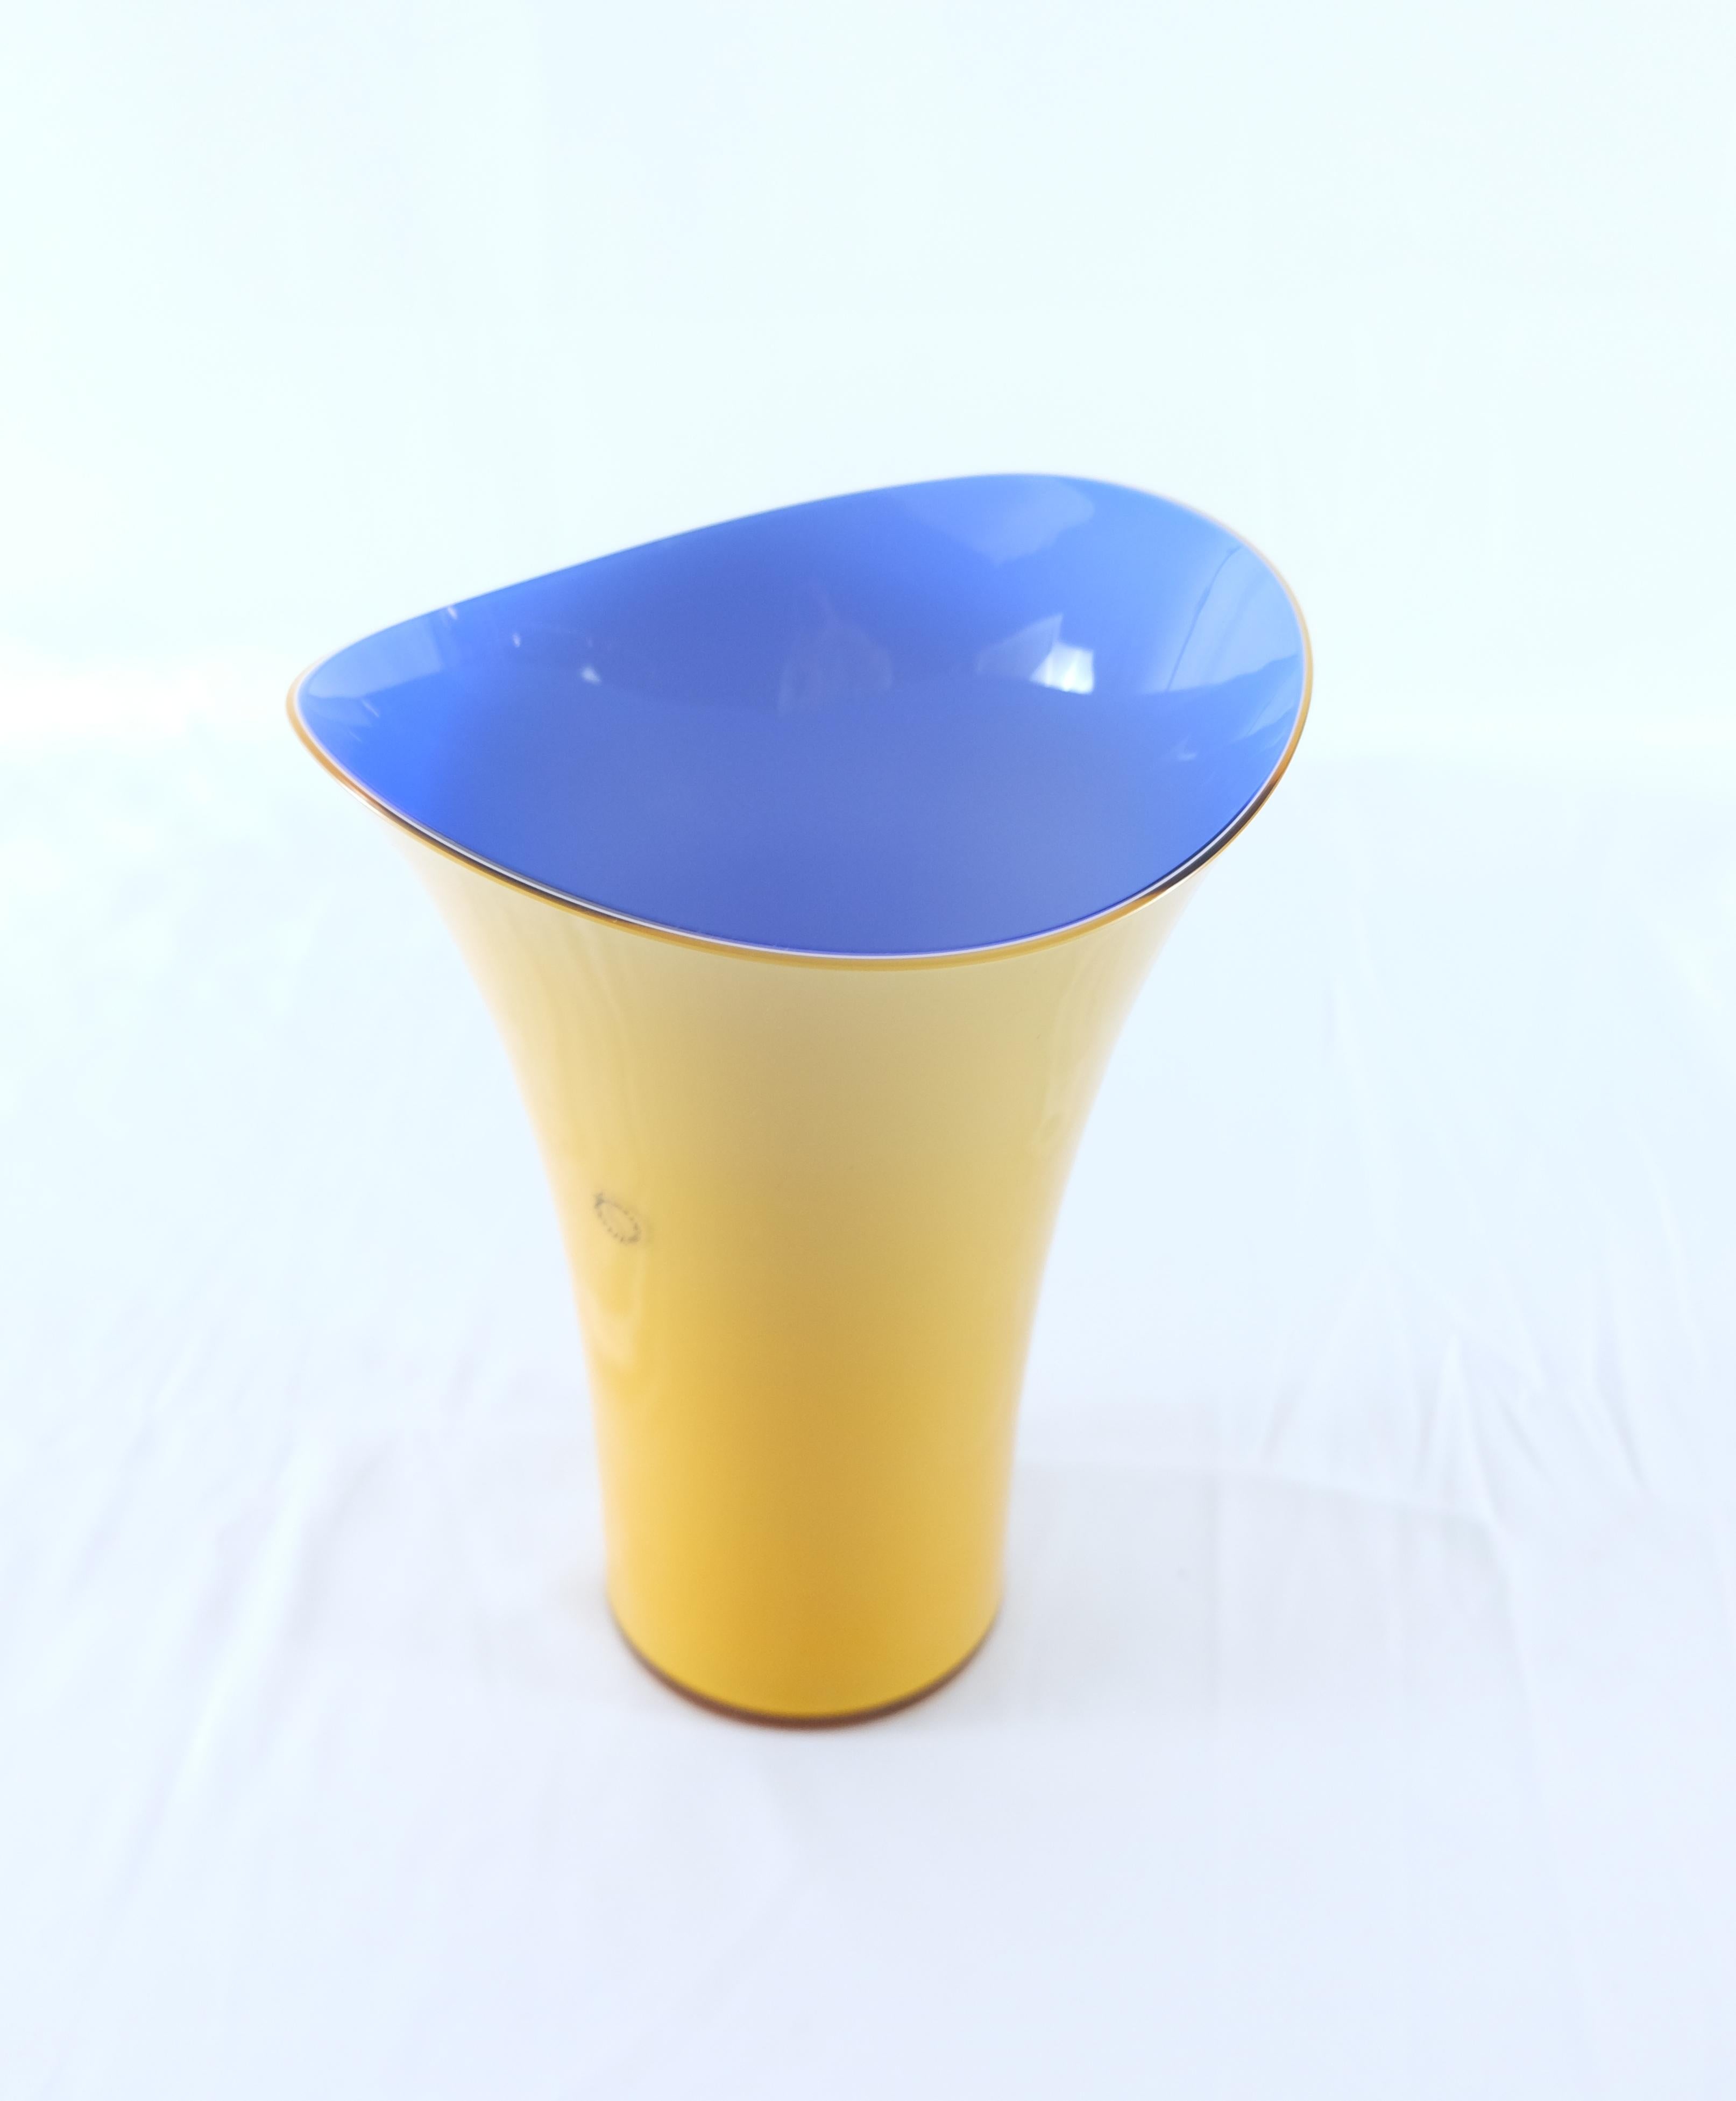 Asymmetric Murano Glass Vase by V. Nason & C., Italy, Blue and Yellow In Excellent Condition For Sale In Miami, FL